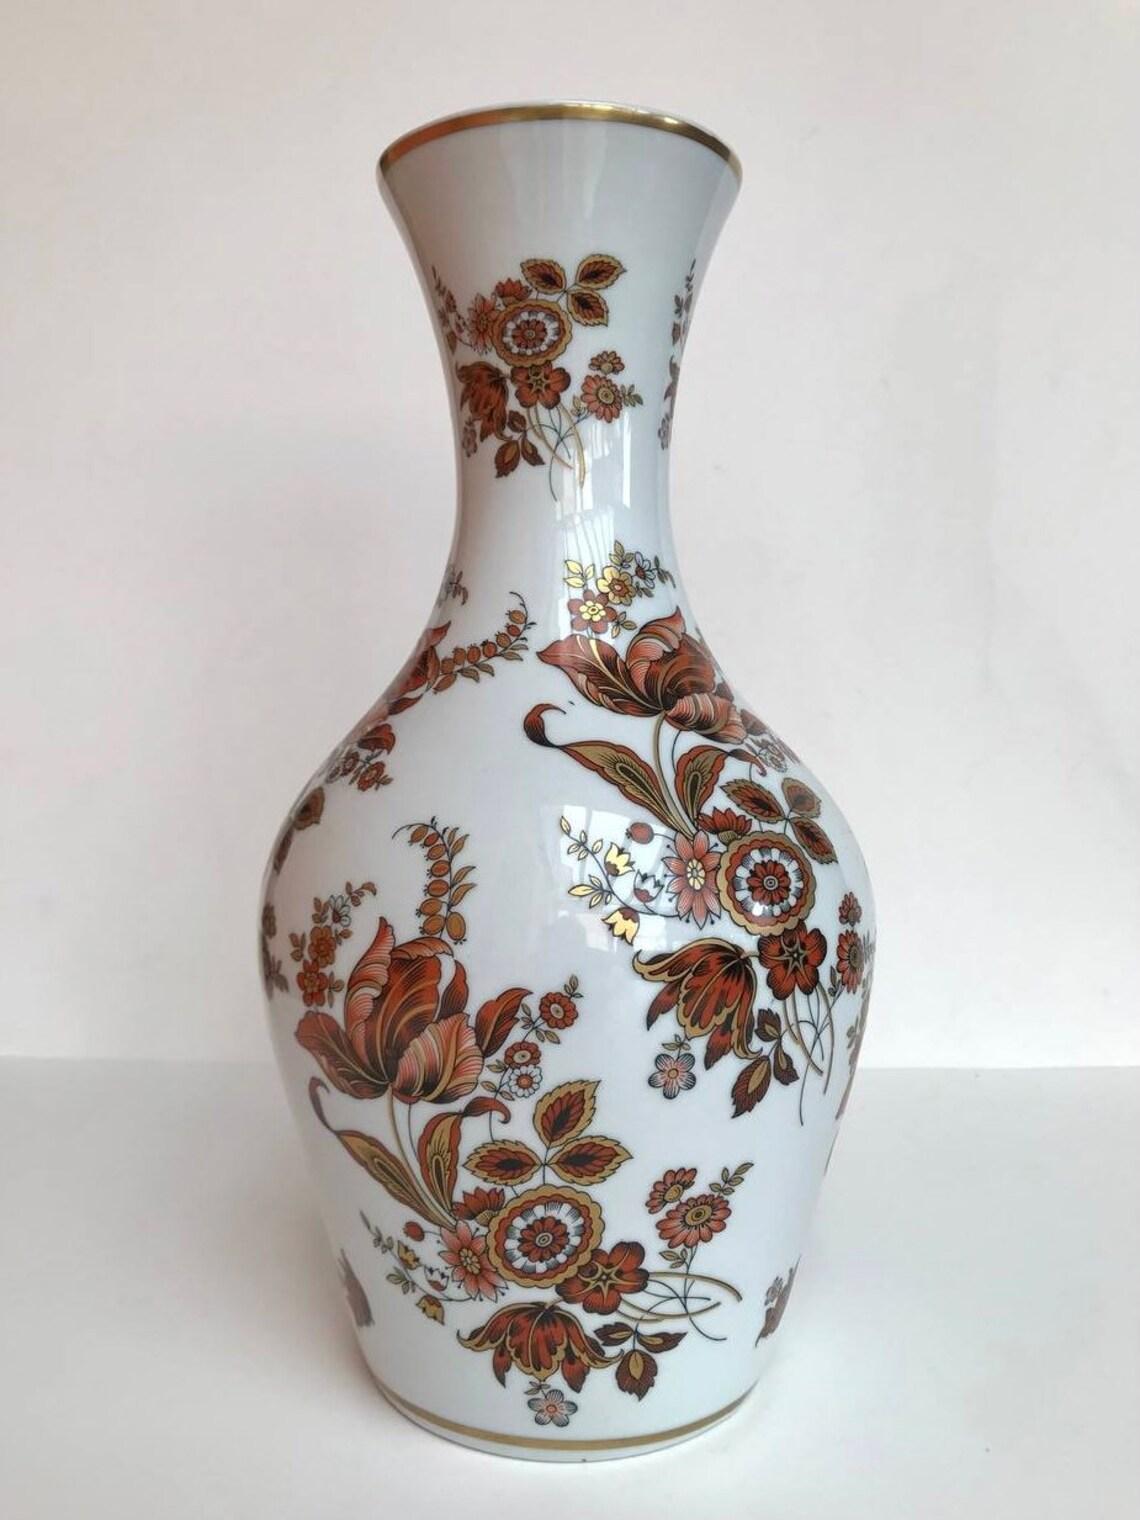 Vintage Porcelain floral pattern vase.

Ouragan - Ulysse Paris.

Floral decor using 24 k gold, with a stamp and signature on the vase.

Vintage, 1980’s

In excellent condition, no chips, cracks or crazing.

Size:

Height - 12.4 inc 31.5